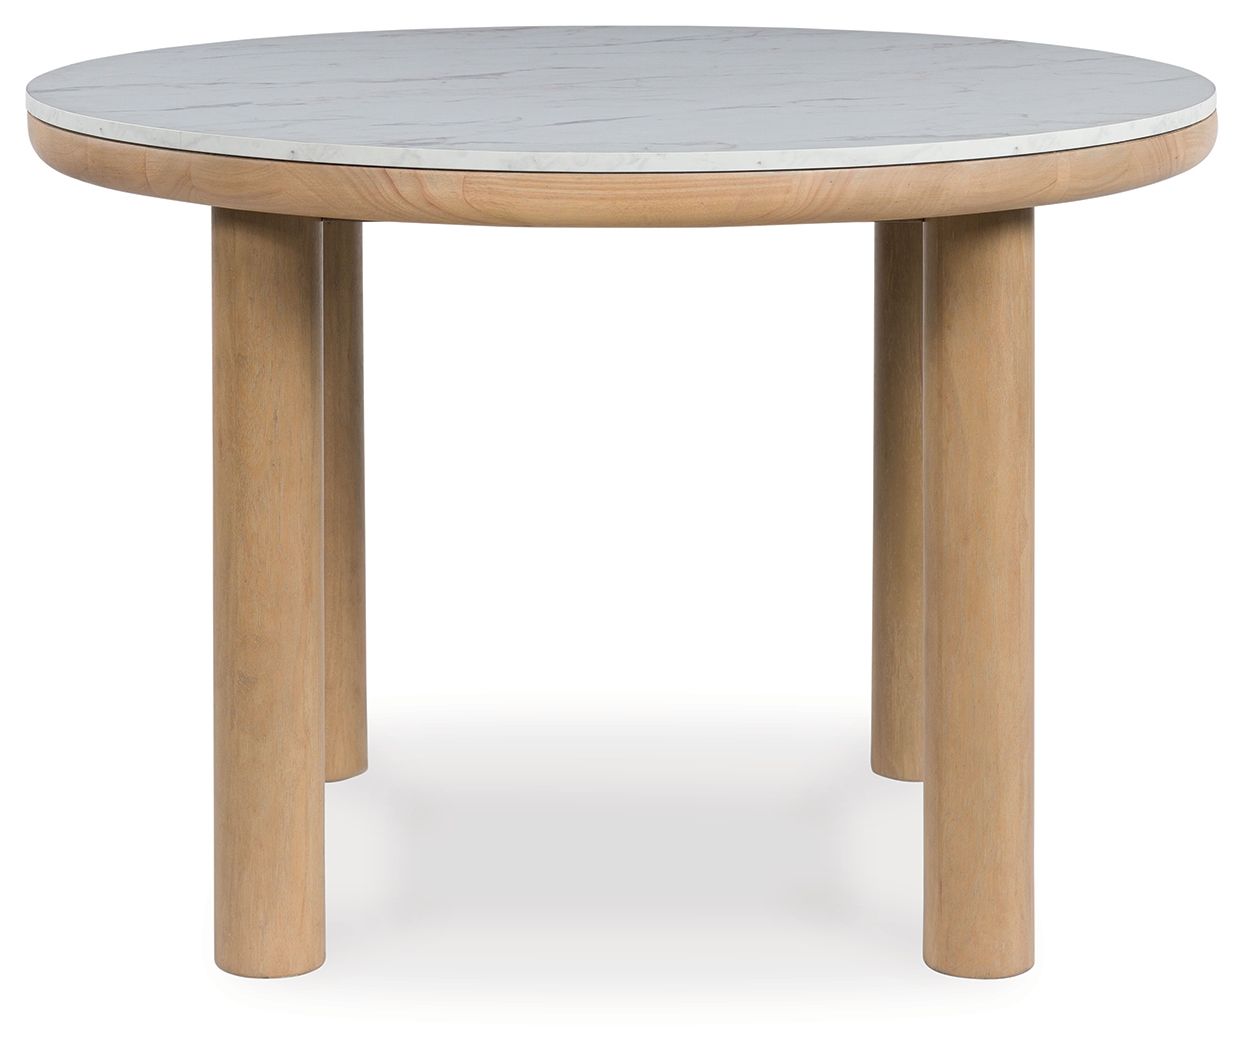 Sawdyn - Light Brown - Round Dining Room Table - Tony's Home Furnishings